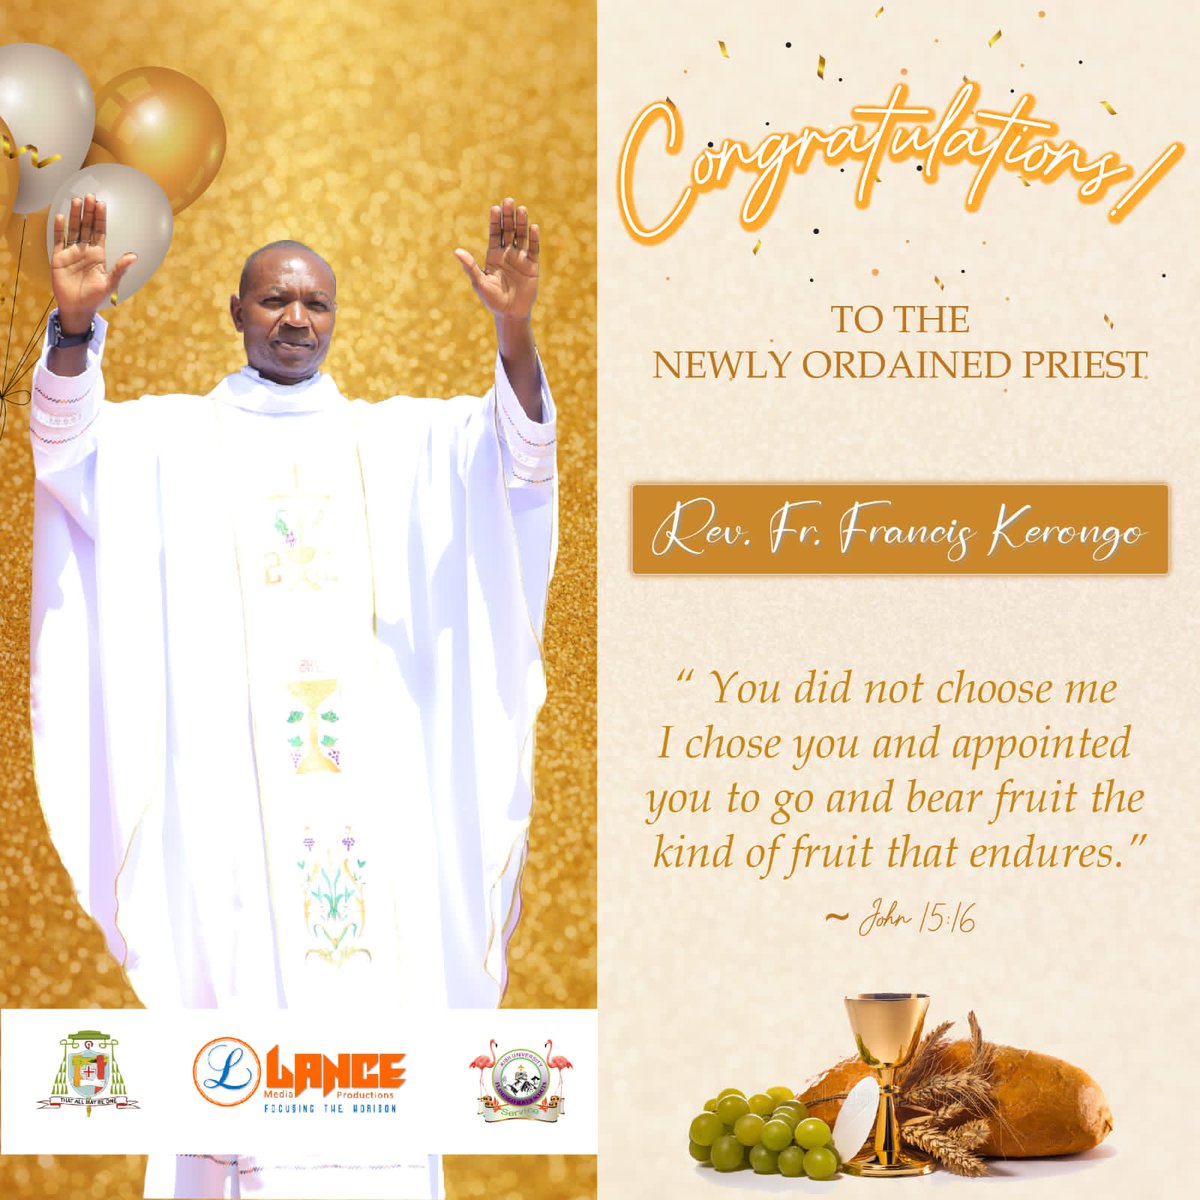 May He give you the grace to serve in humility and obedience all the days of your life. Congrats
@AMRNowKe @lancemedia254 @ScoutsPhoenix @ksuscouts @StJohnKisii @kisiuniofficial @MillionTreesKe @ksu_tax @howfoundation11 @Itsericmaina
@ndegengere_d @odiwuor_byrone
#CEOandPATRON